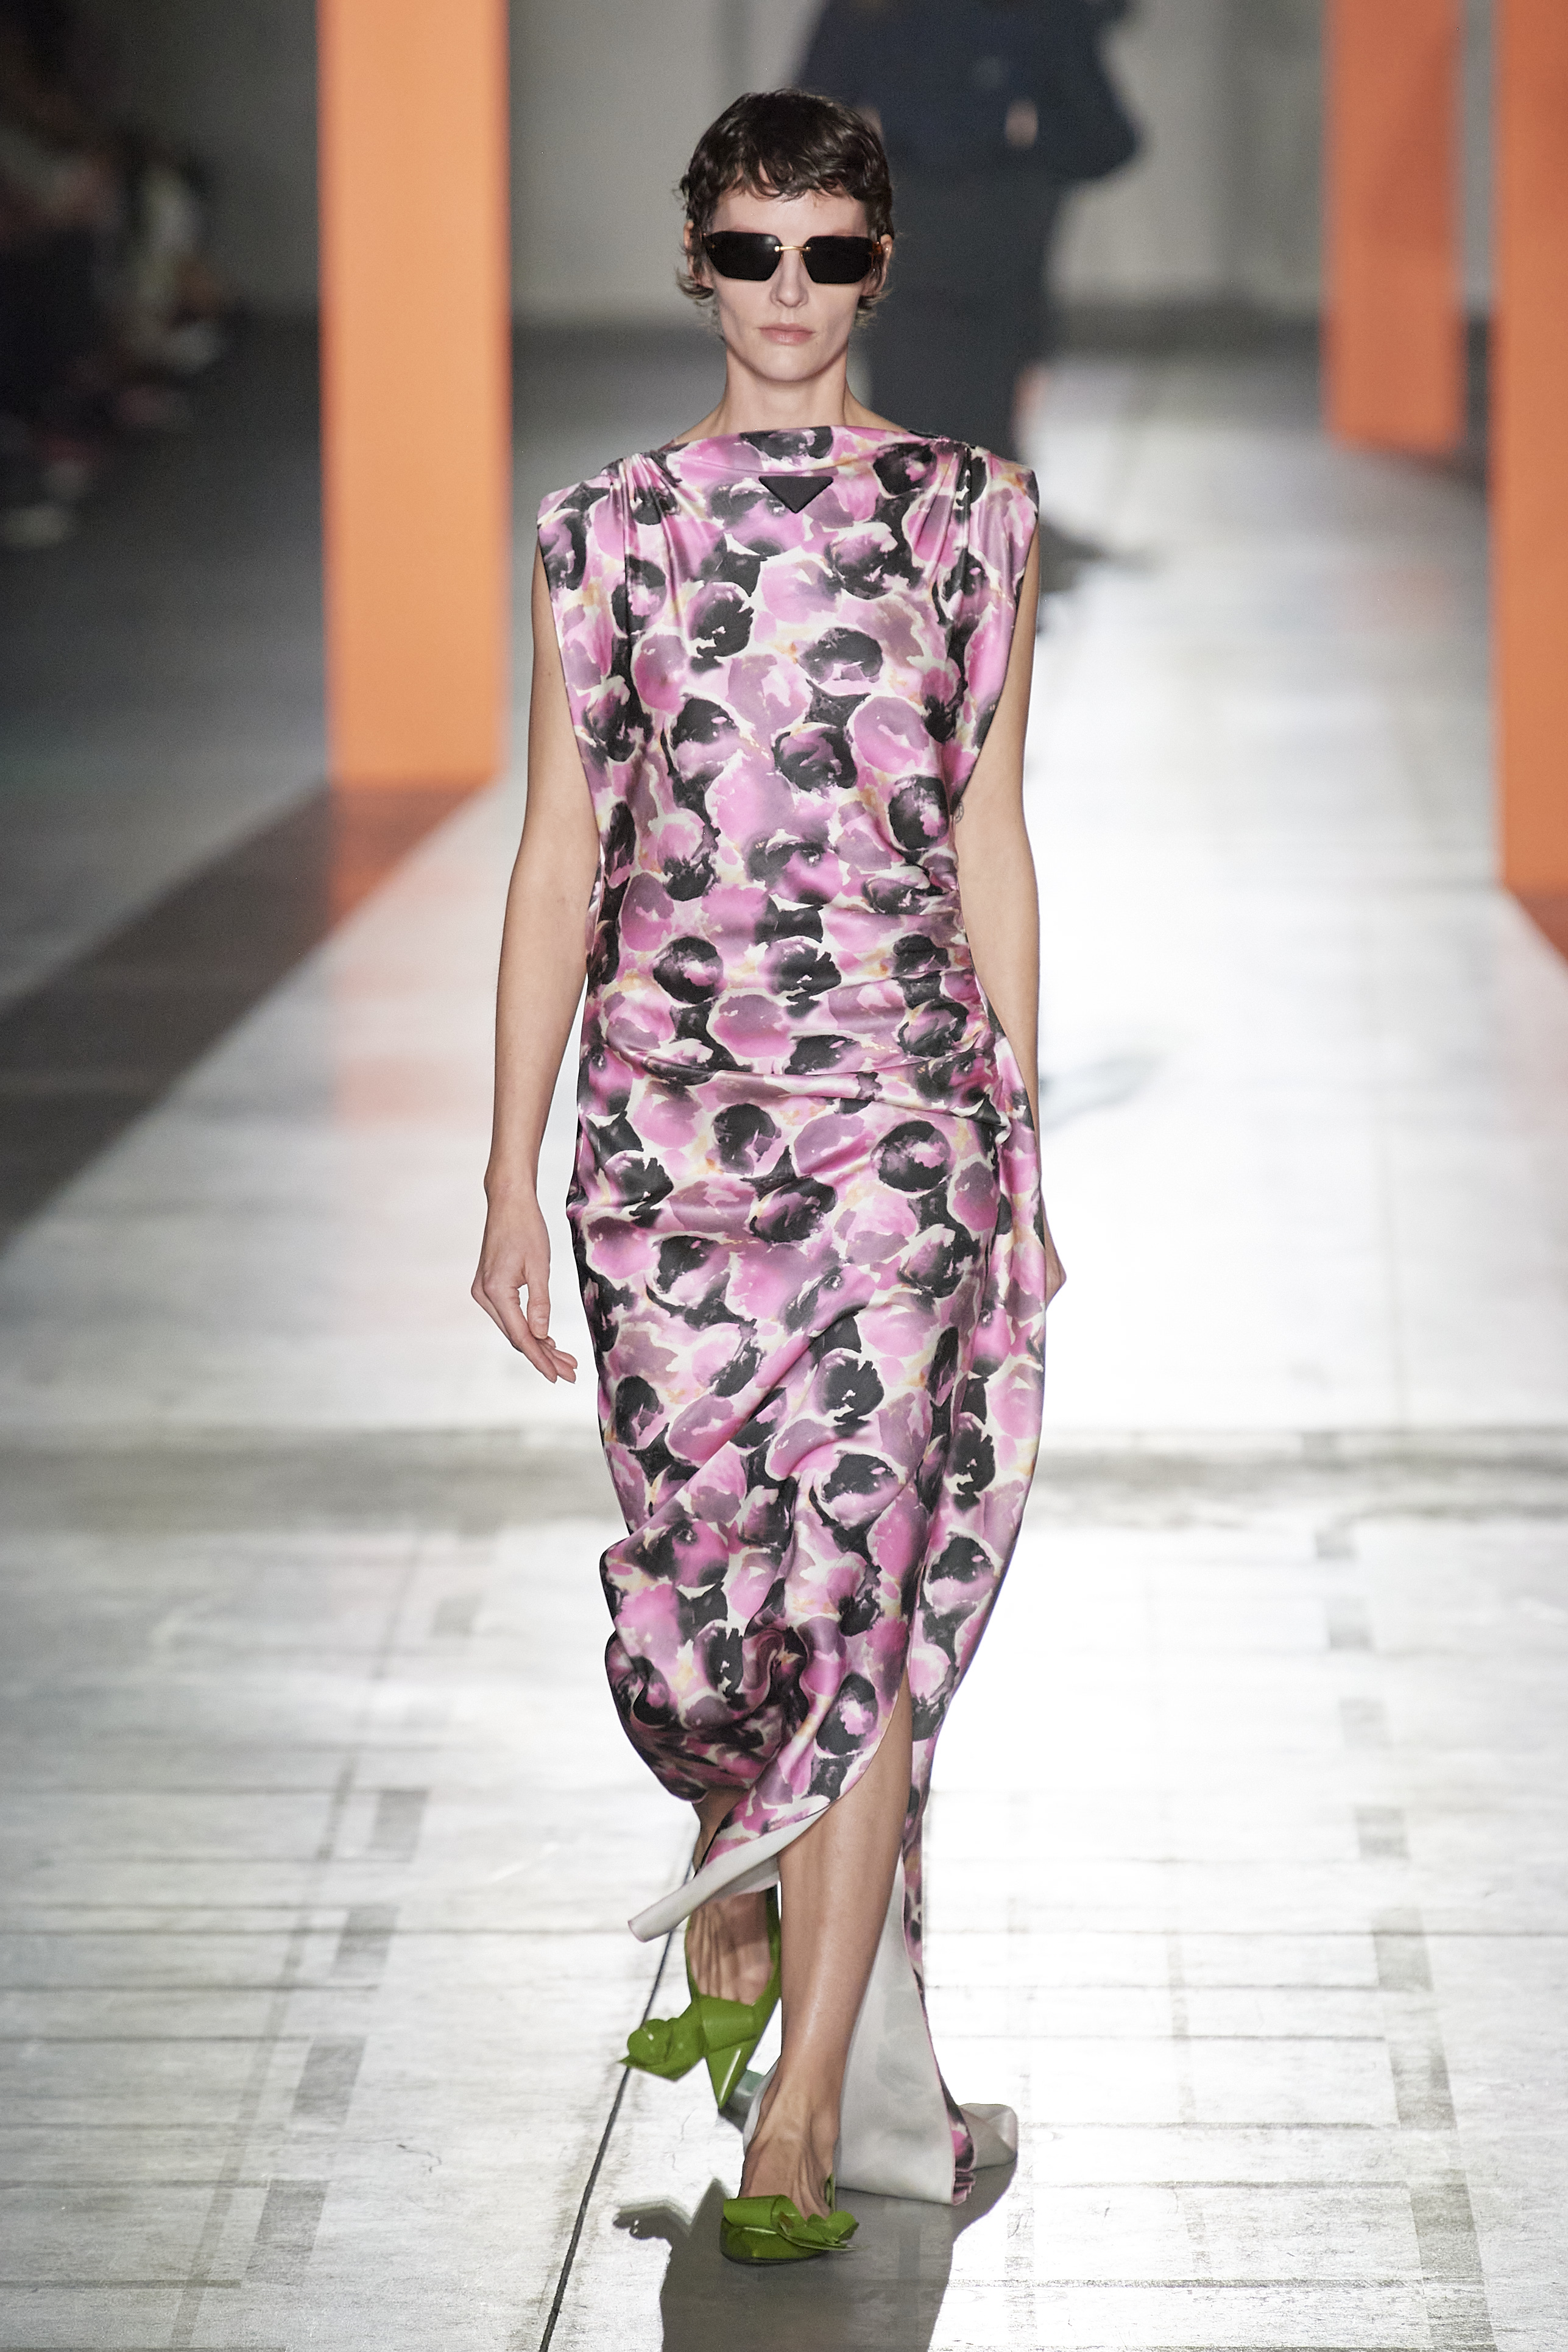 Prada AW23 was an exercise in modest elegance